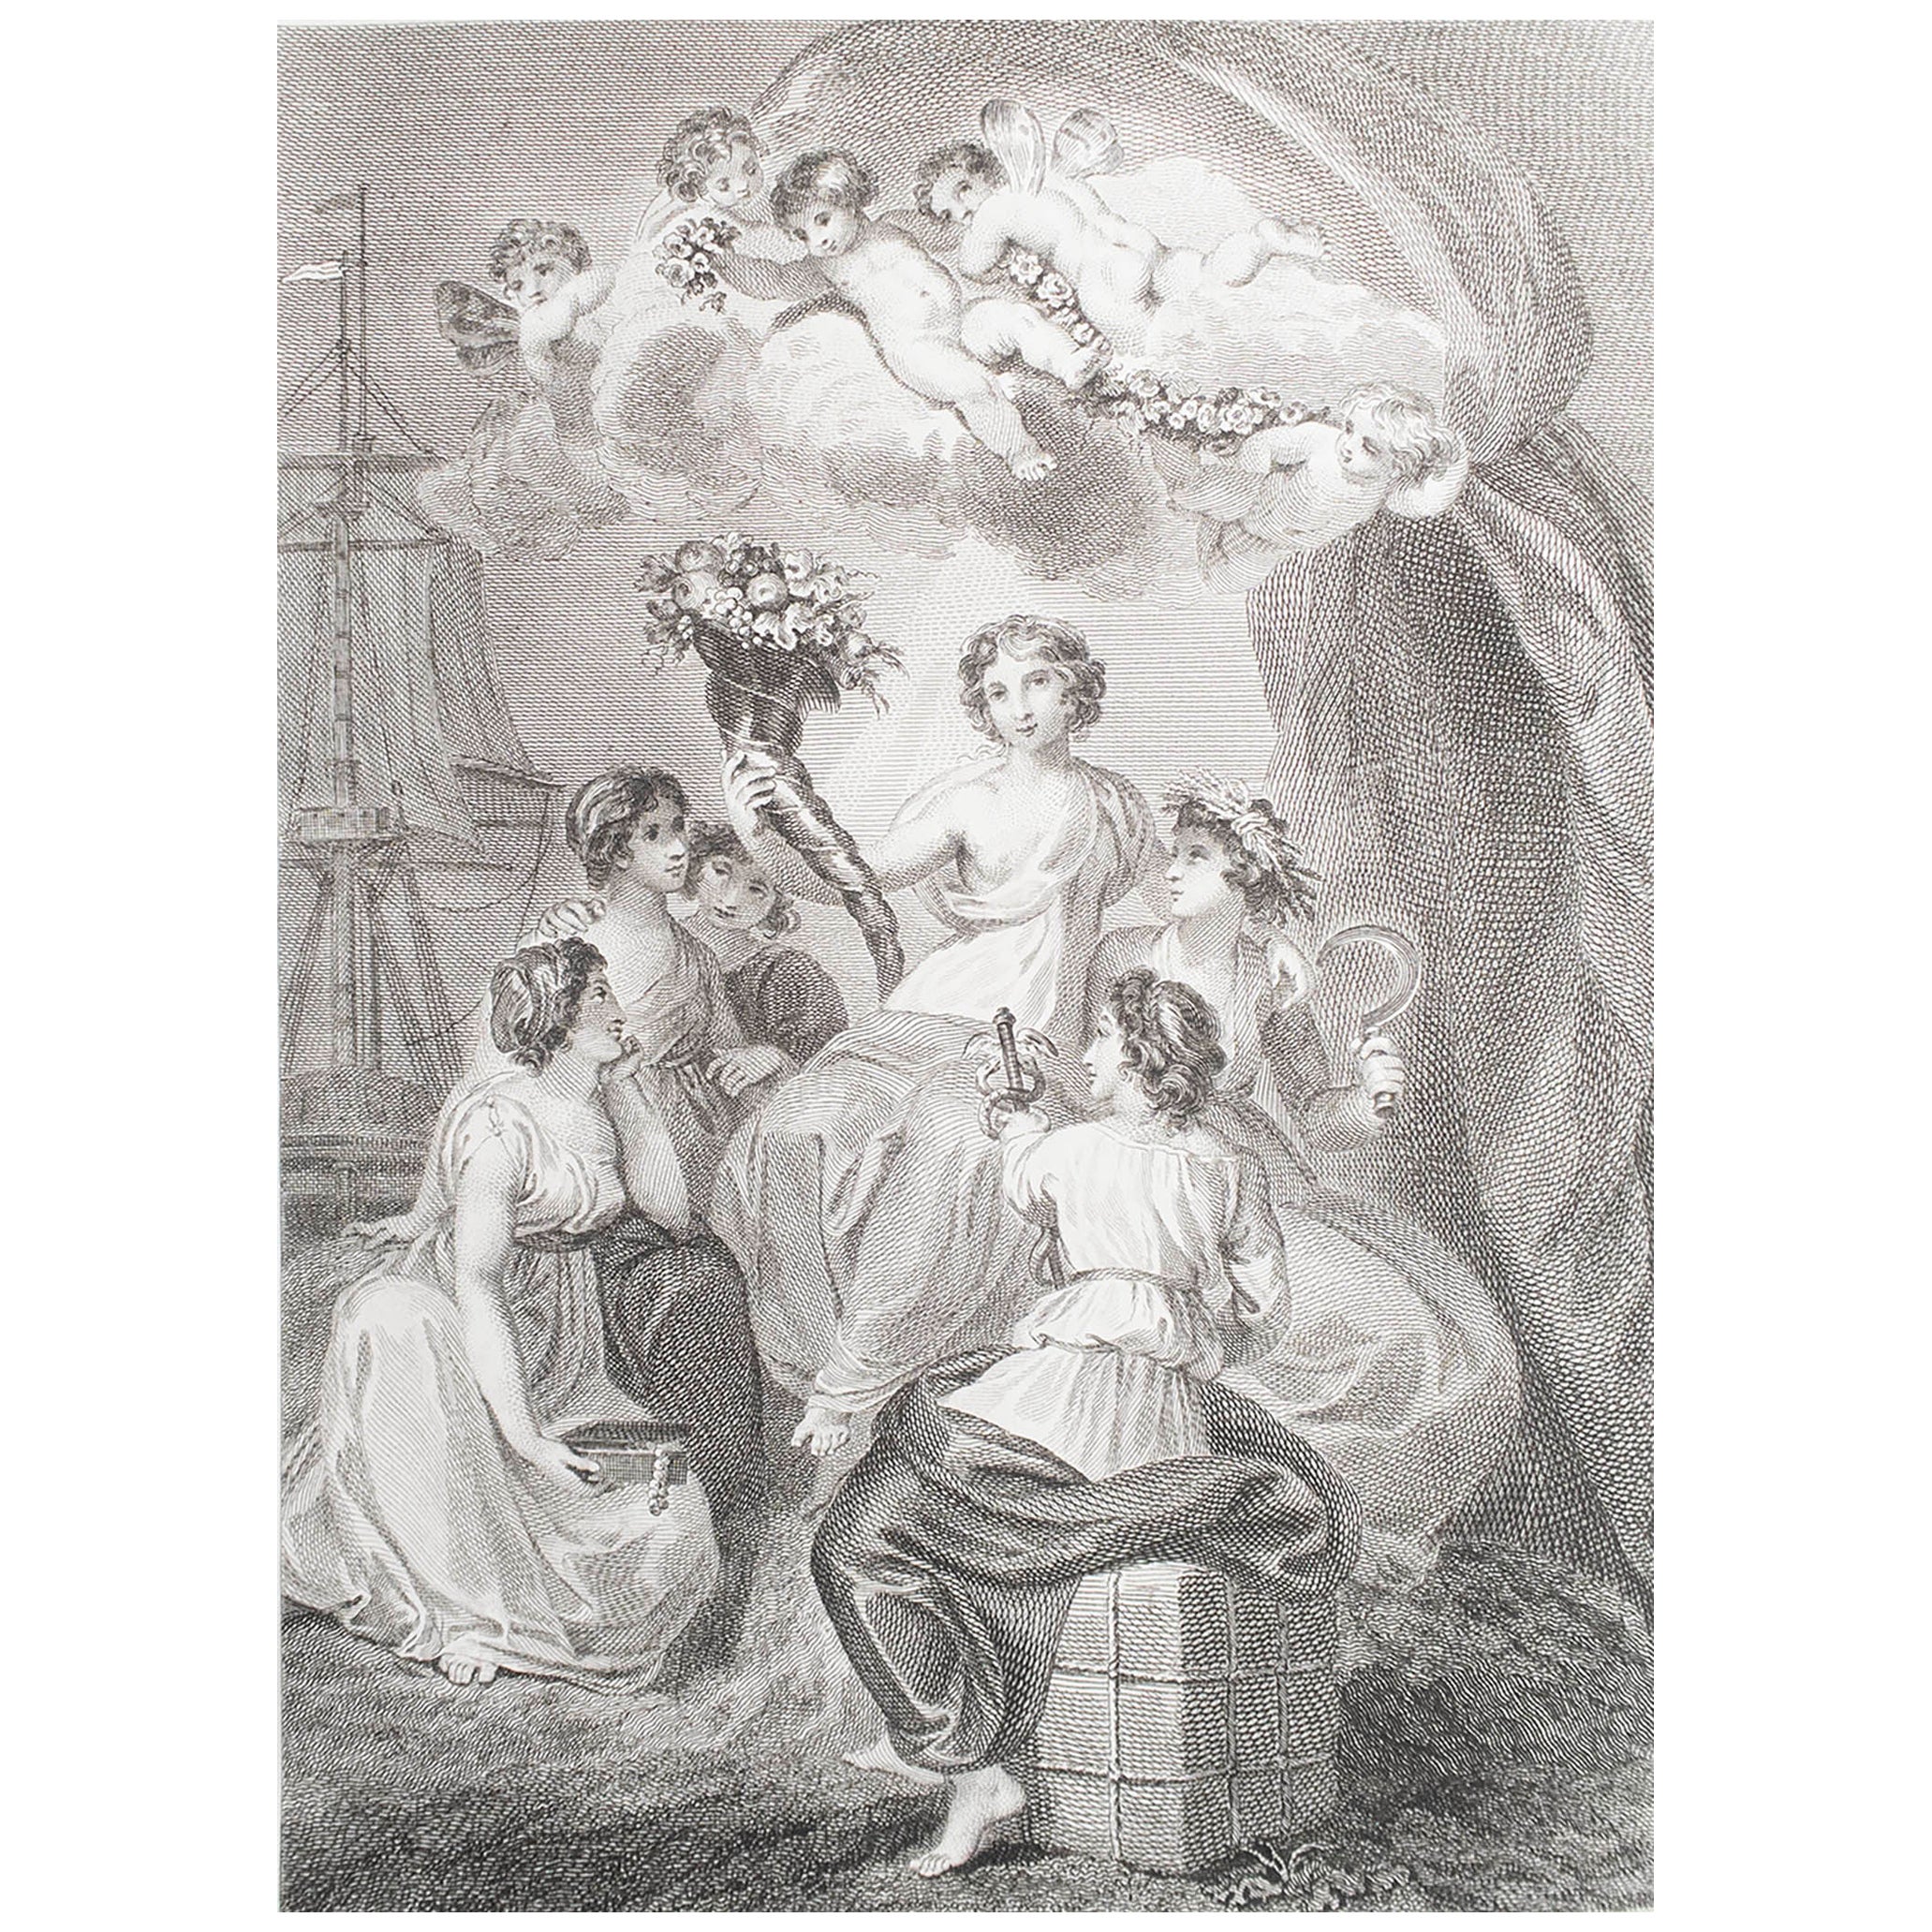 Original Antique Print of Ladies And Cherubs After T.Stothard. Dated 1795 For Sale